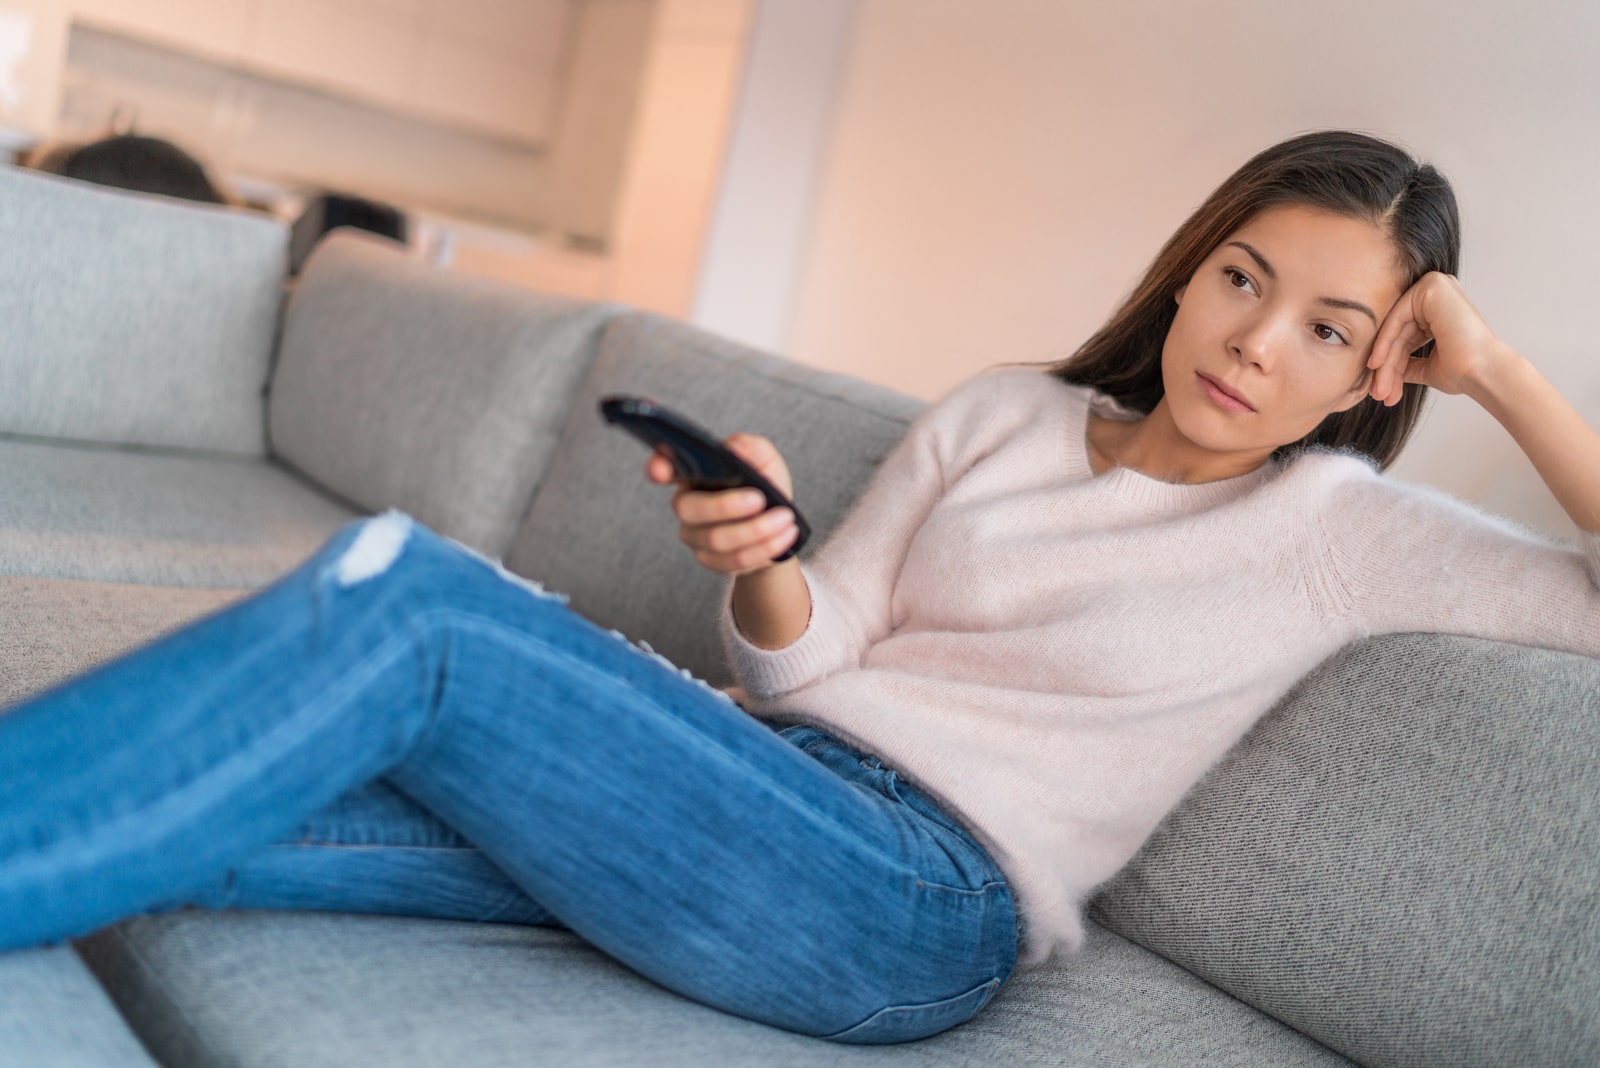 woman watching tv alone in apartment sitting on sofa